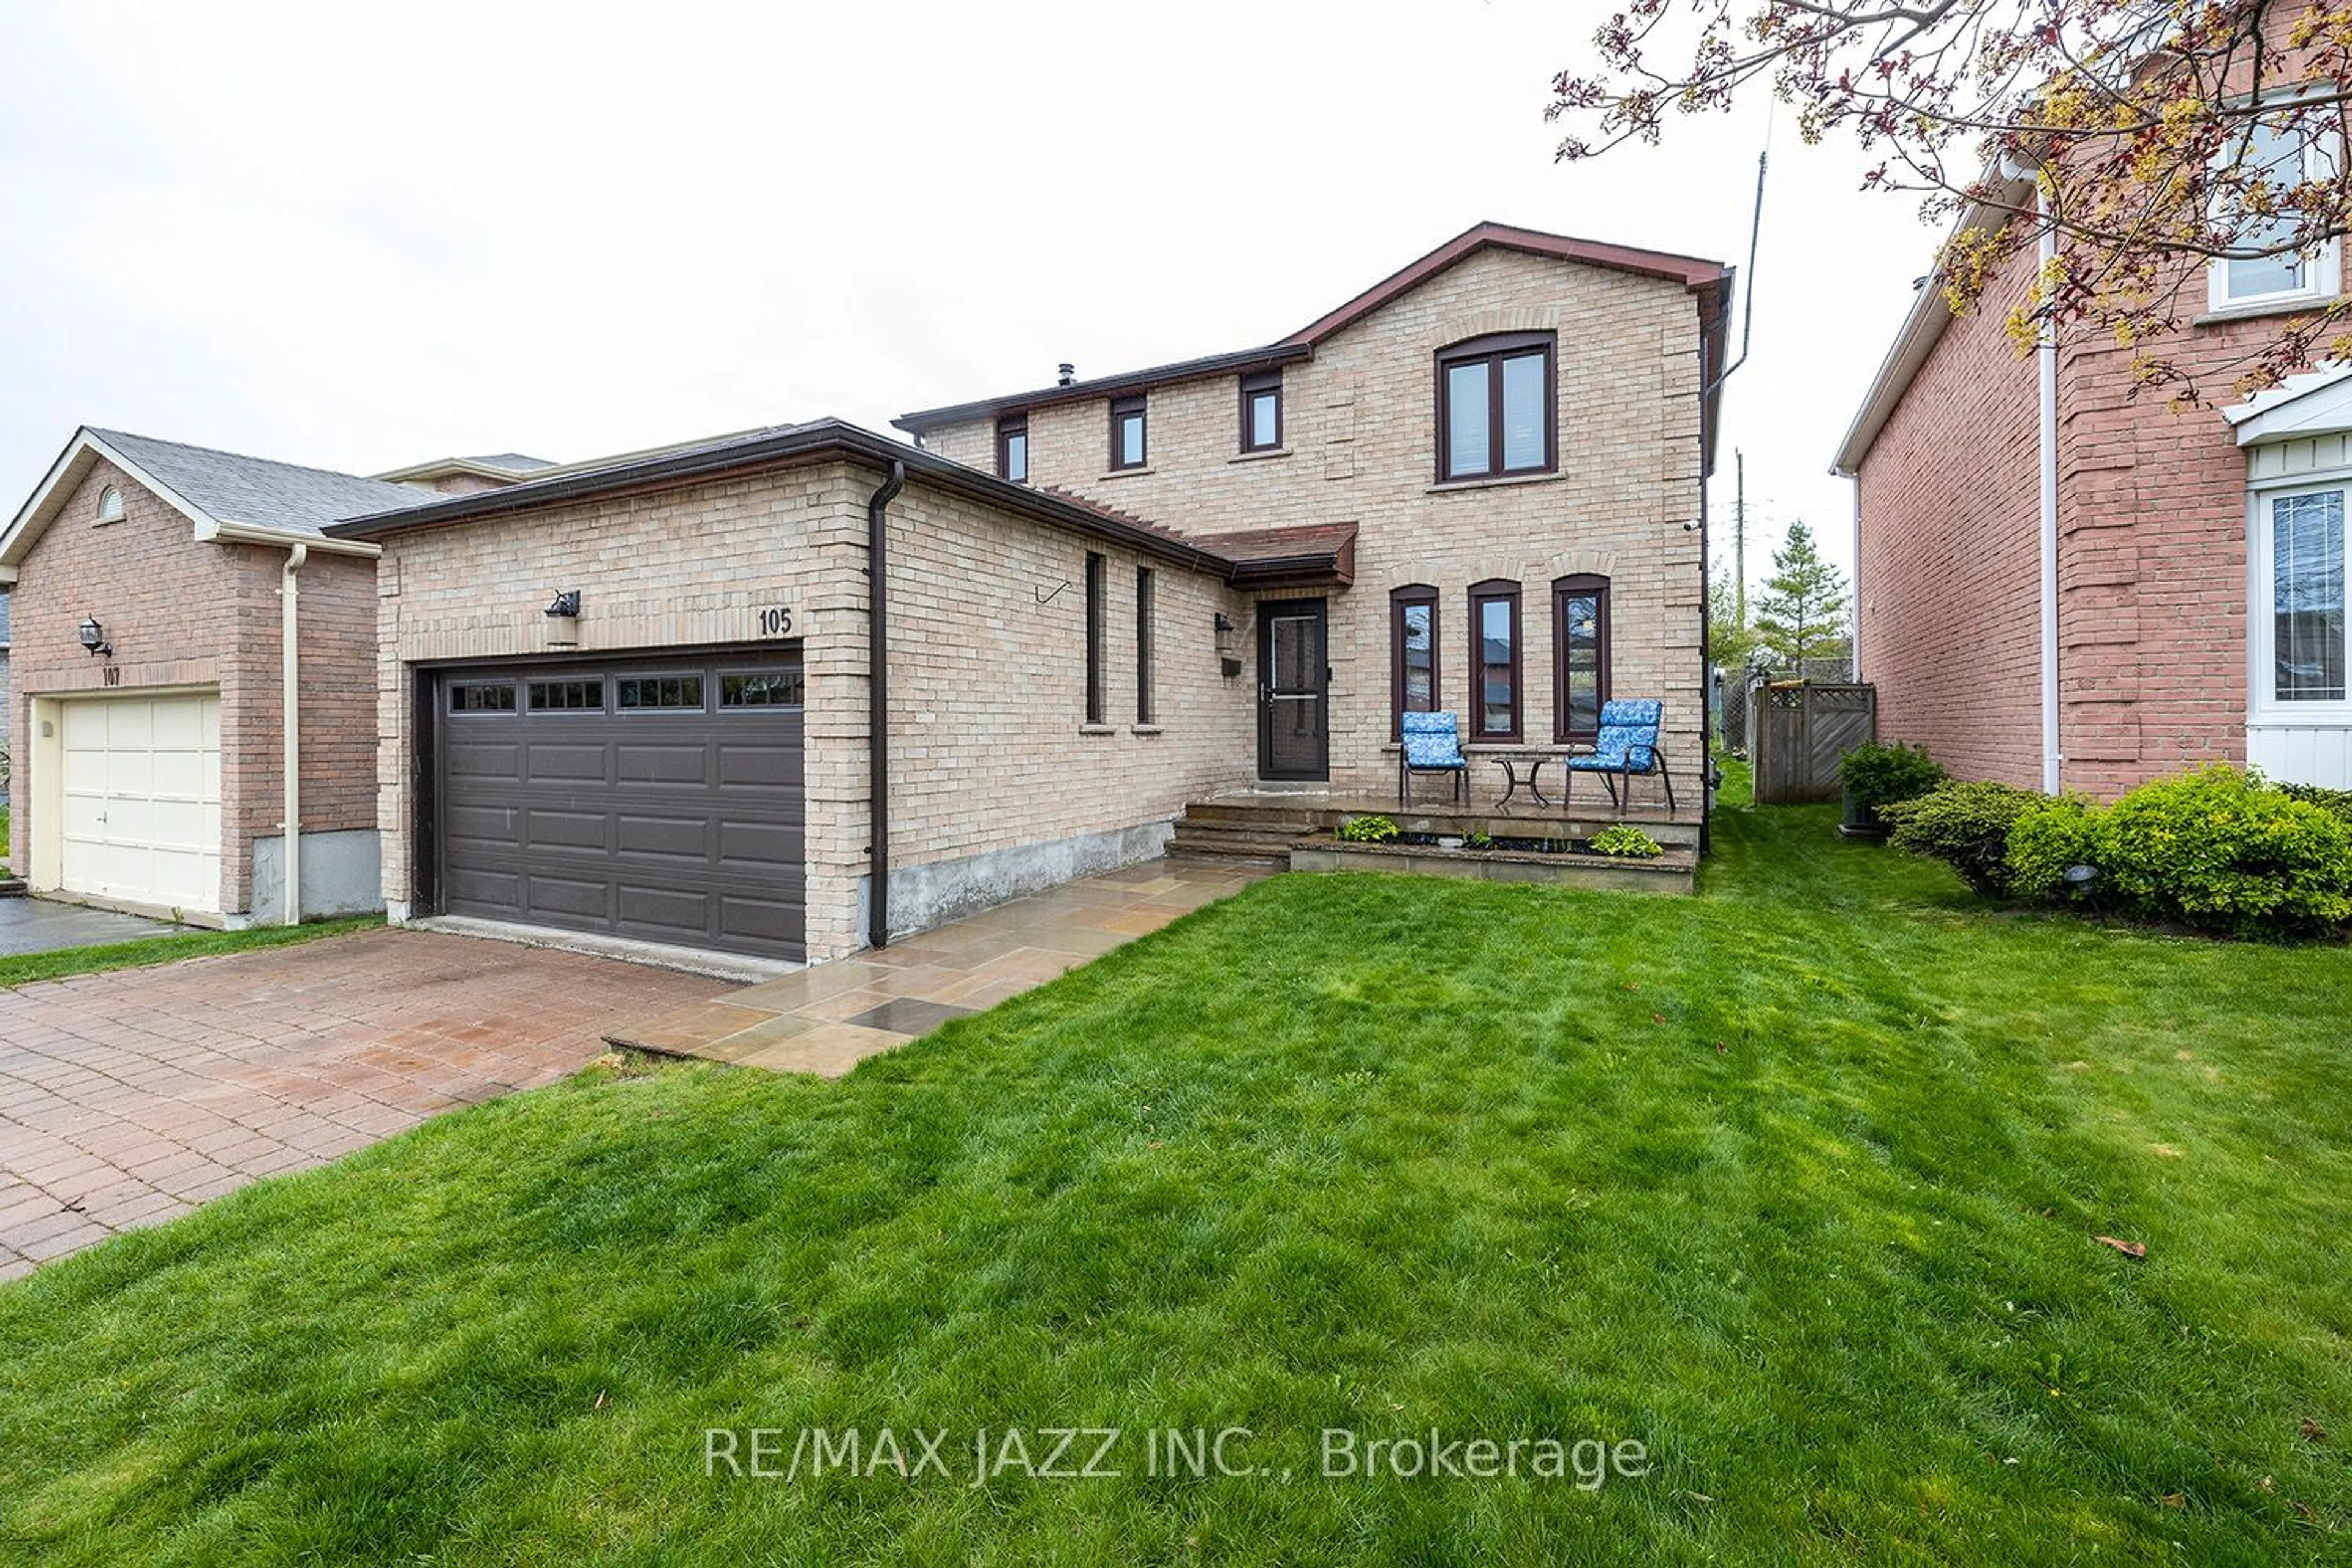 Home with brick exterior material for 105 Marshall Cres, Ajax Ontario L1T 2P3